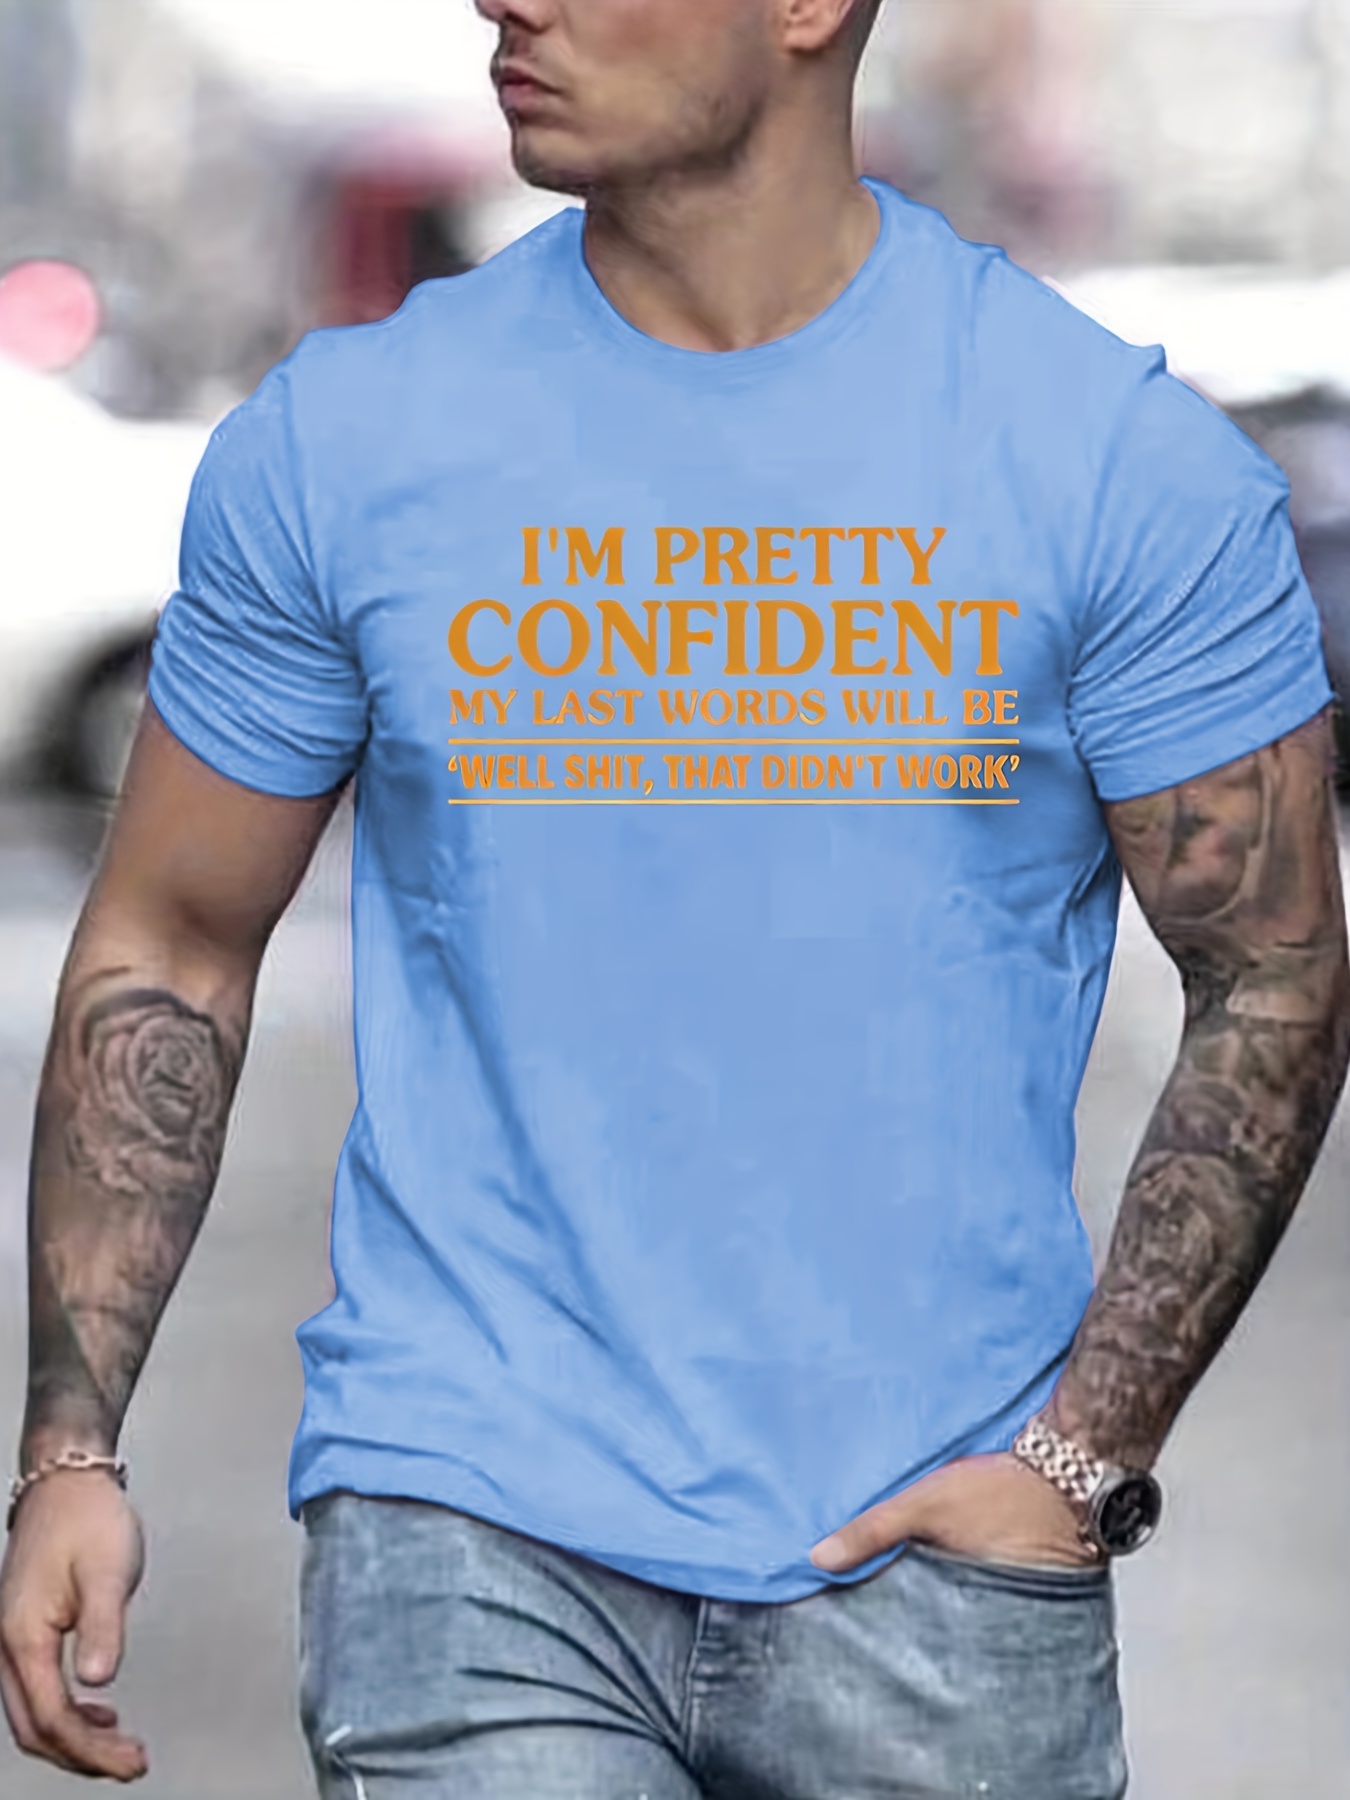 powerful slogan print mens graphic design crew neck t shirt casual comfy tees t shirts for summer mens clothing tops details 31